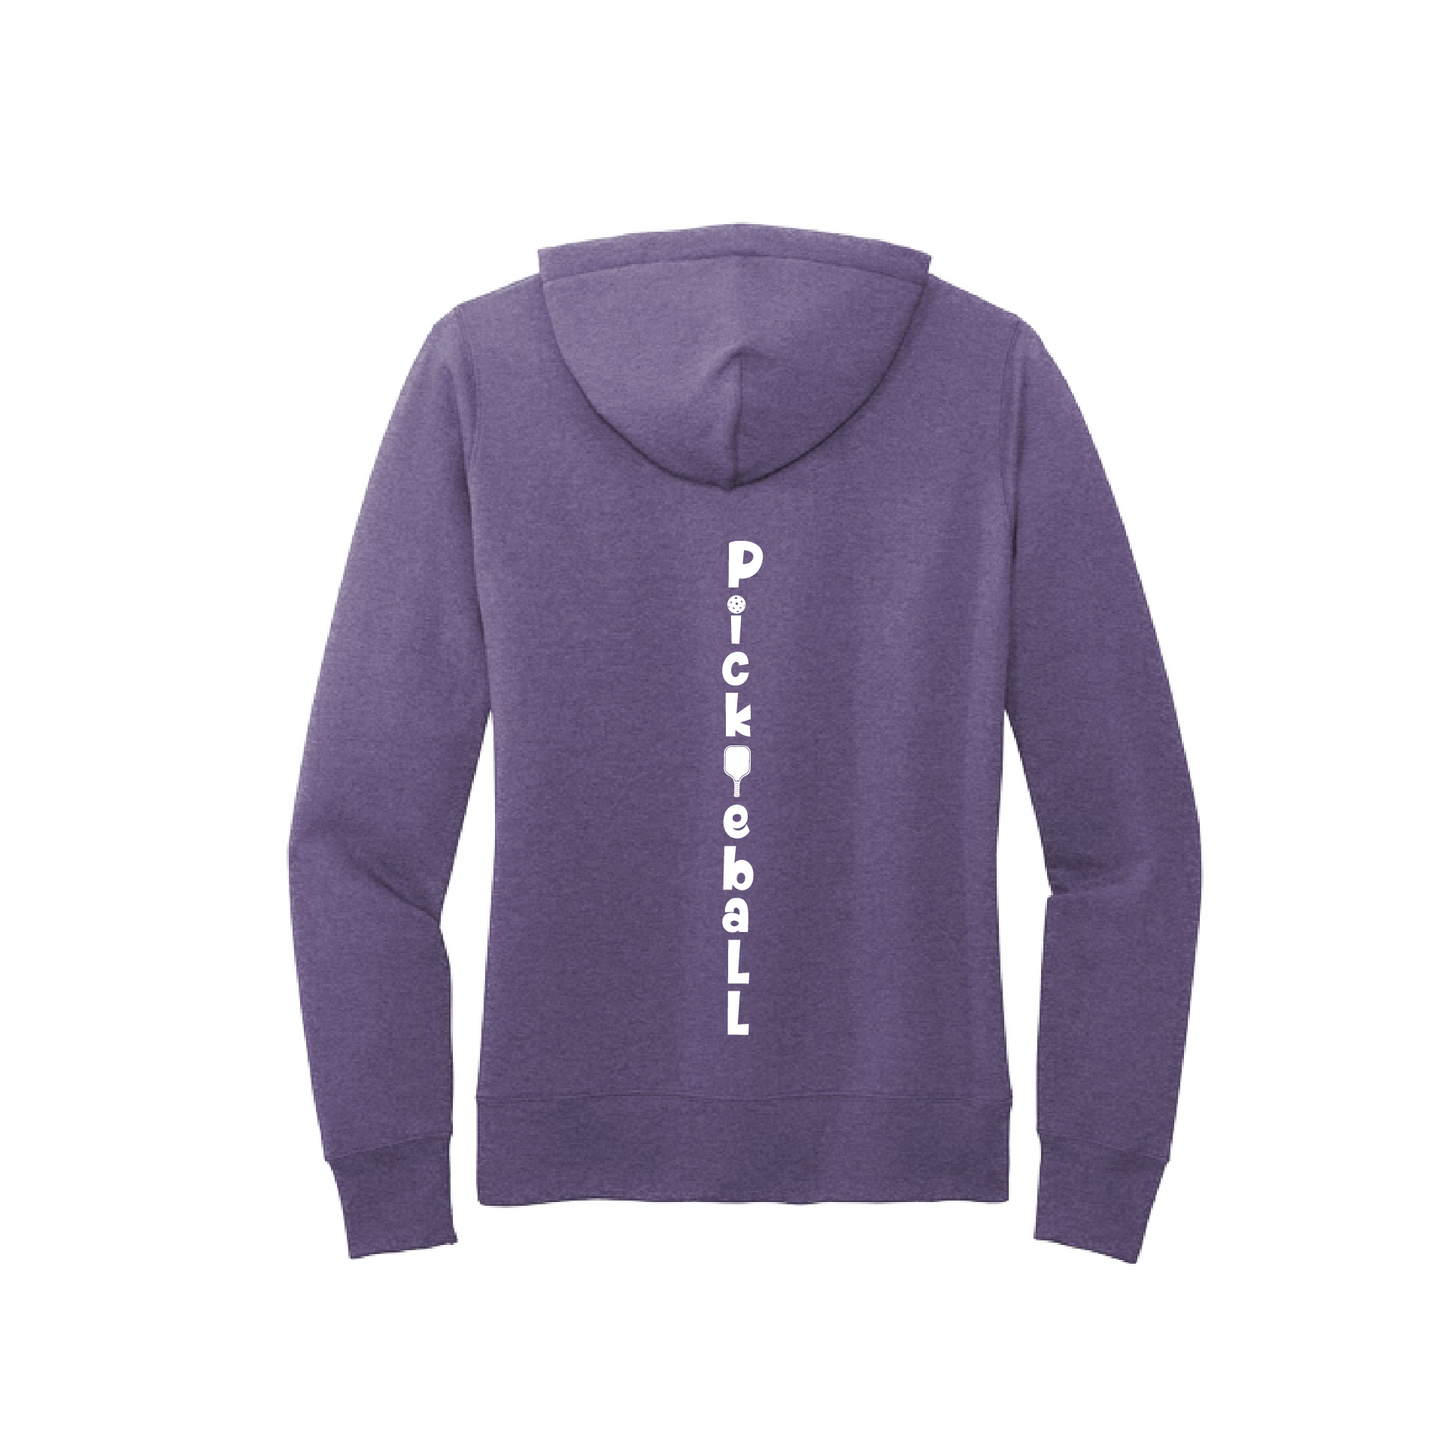 Pickleball Design: Pickleball Vertical (Customizable Location)  Women's Hooded pullover Sweatshirt  Turn up the volume in this Women's Sweatshirts with its perfect mix of softness and attitude. Ultra soft lined inside with a lined hood also. This is fitted nicely for a women's figure. Front pouch pocket.